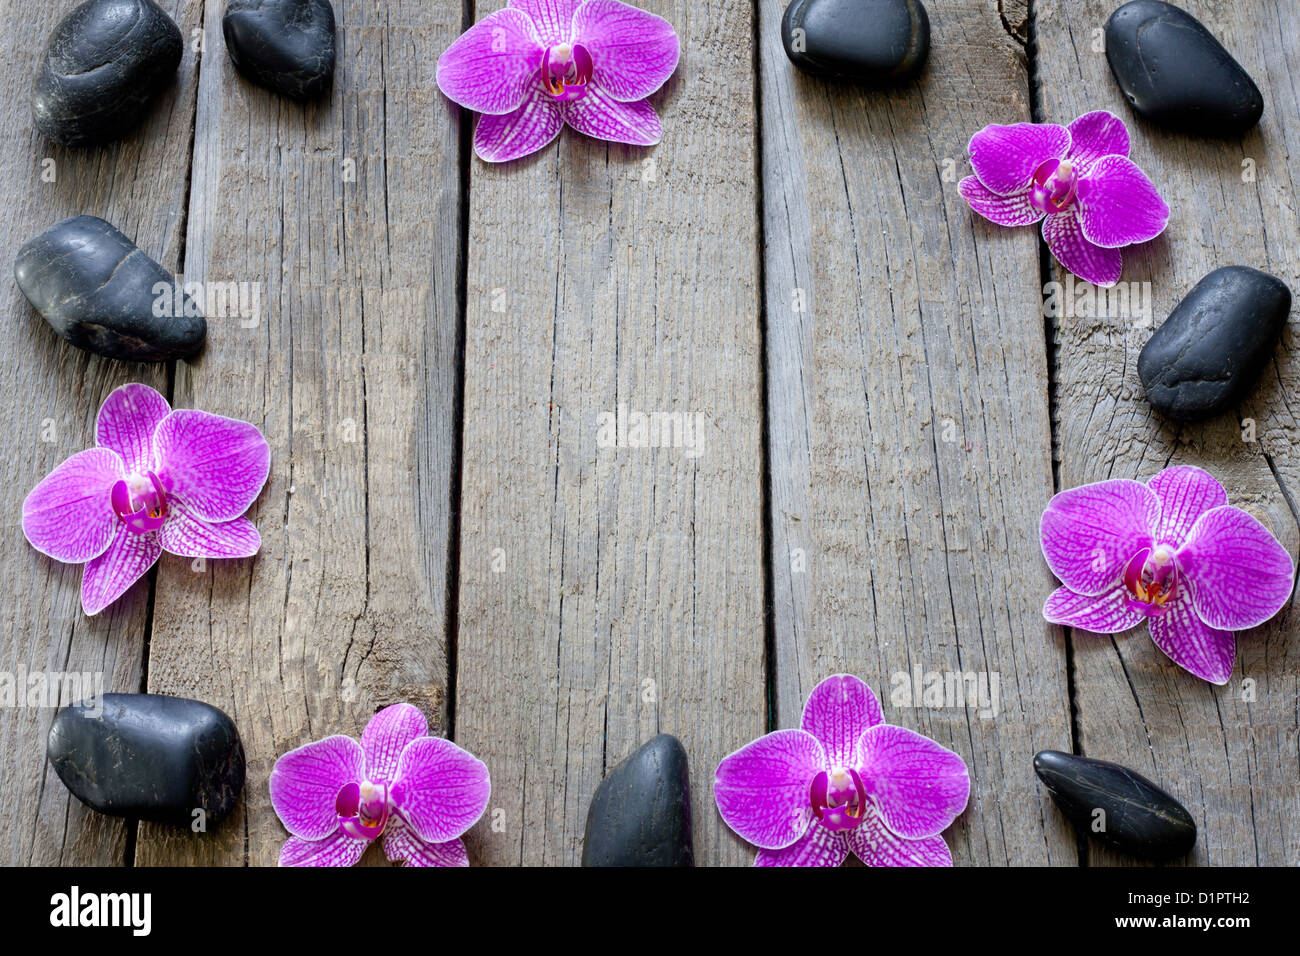 Orchids on wooden boards spa cosmetic abstract vintage background concept creative still life Stock Photo